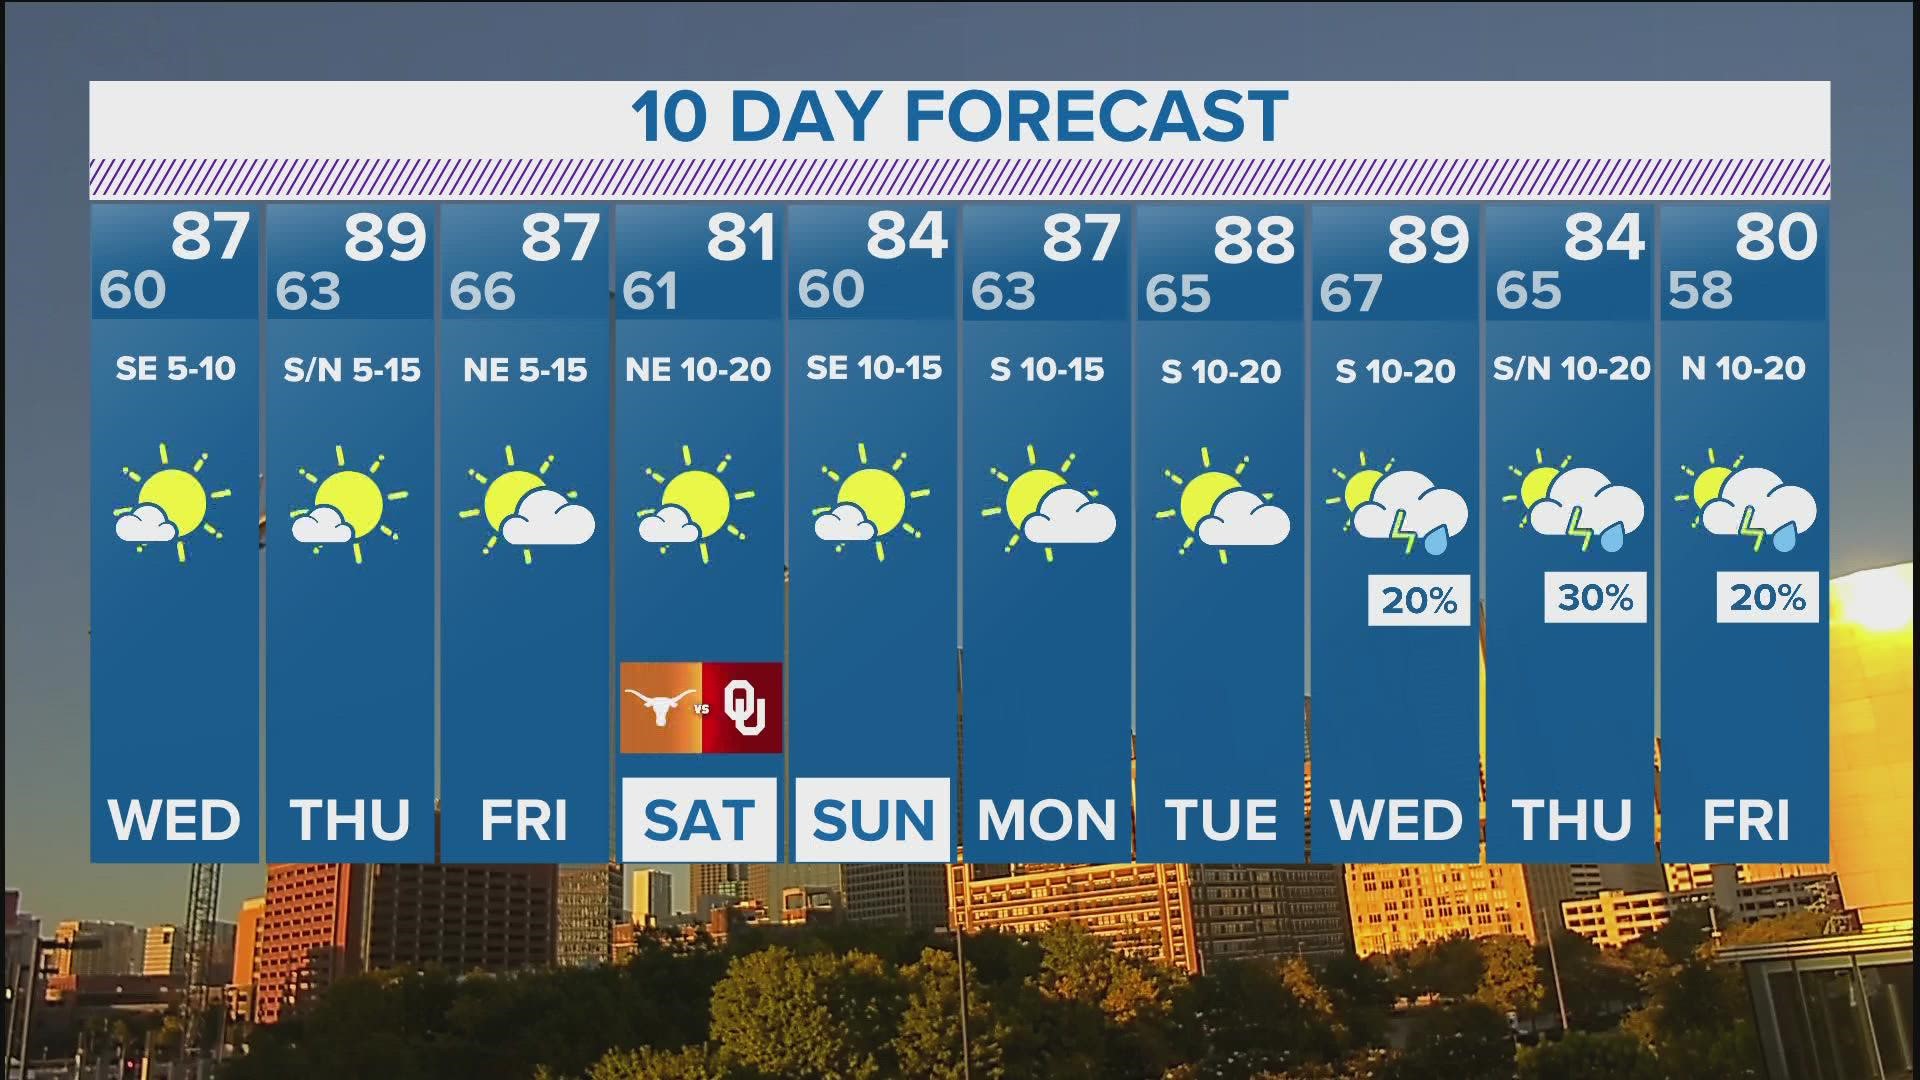 Temps will warm by around a degree or two each day peaking on Thursday with highs near 90°.